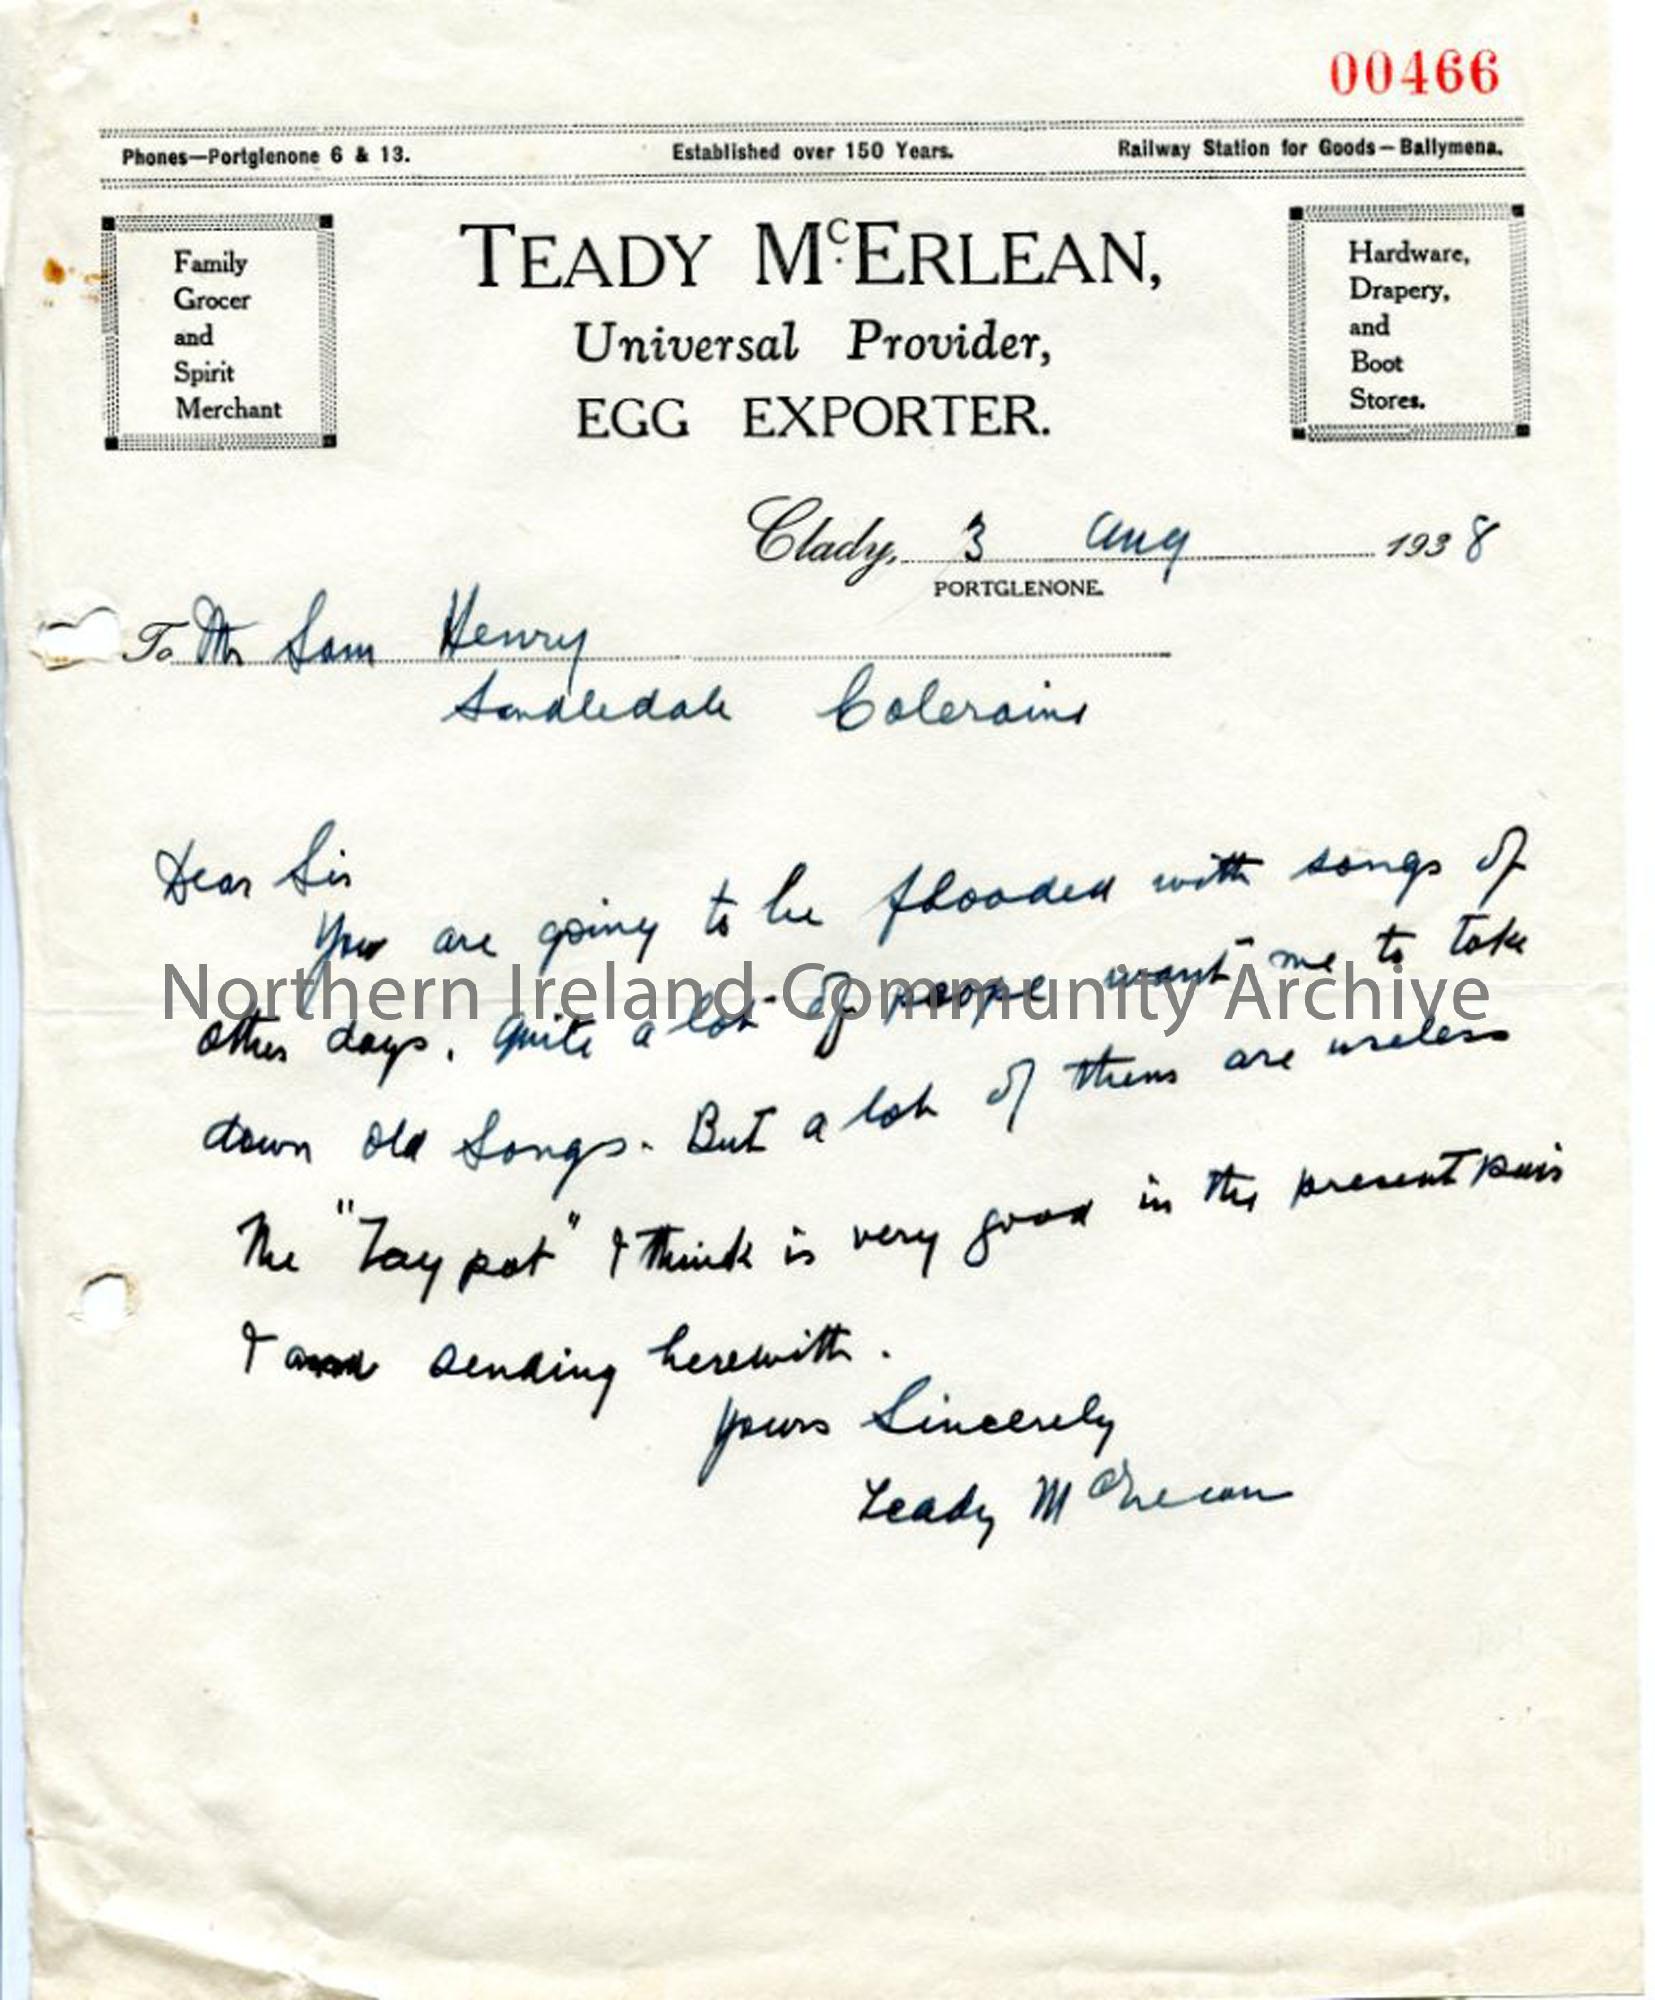 Handwritten letter on Teady McErlean’s business headed notepaper re willingness of people to donate songs.